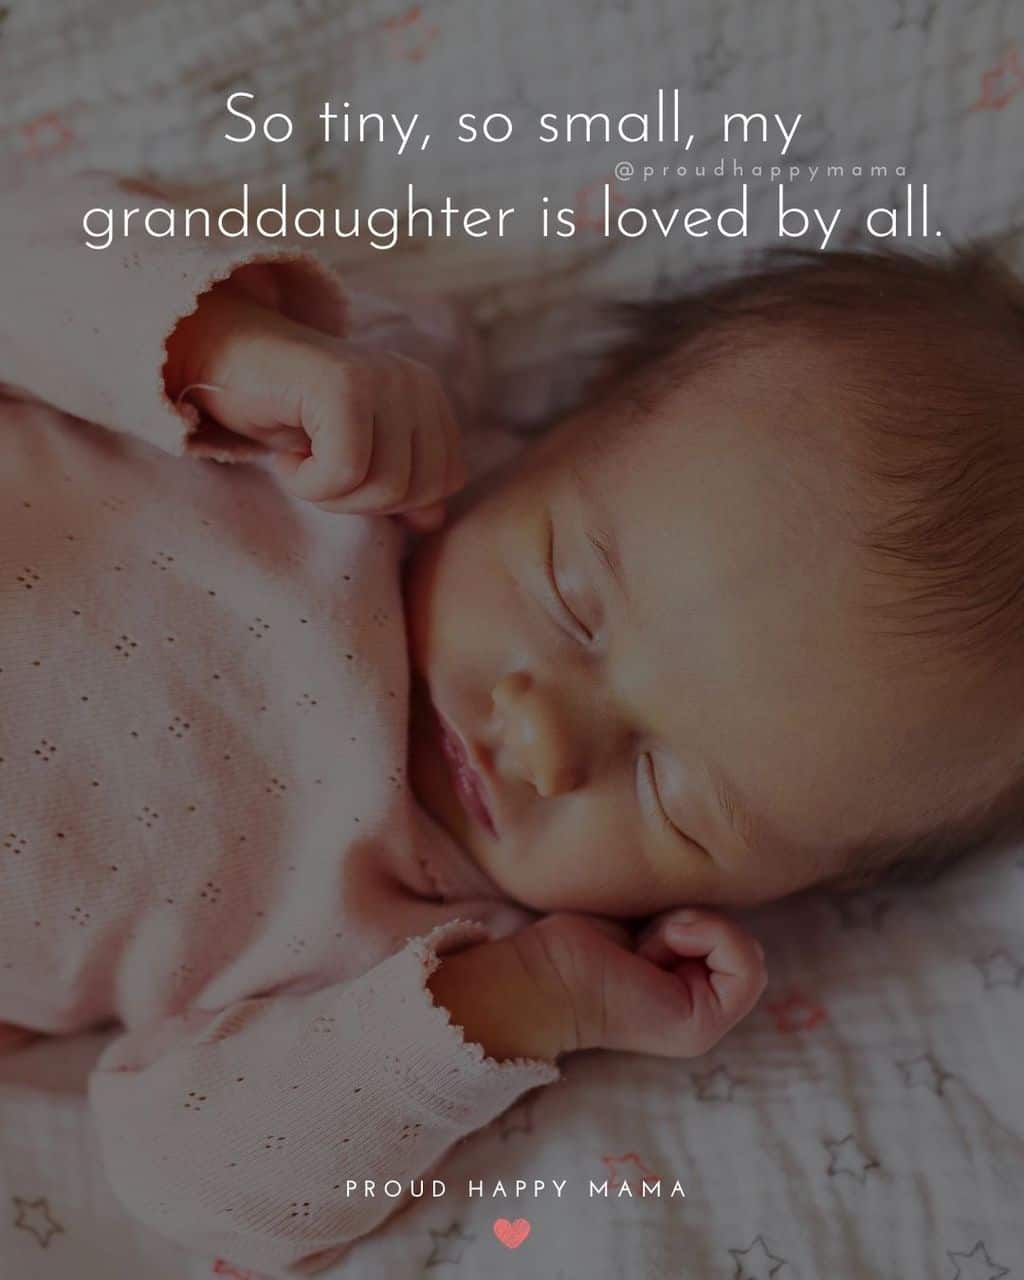 Granddaughter Quotes - So tiny, so small, my granddaughter is loved by all.